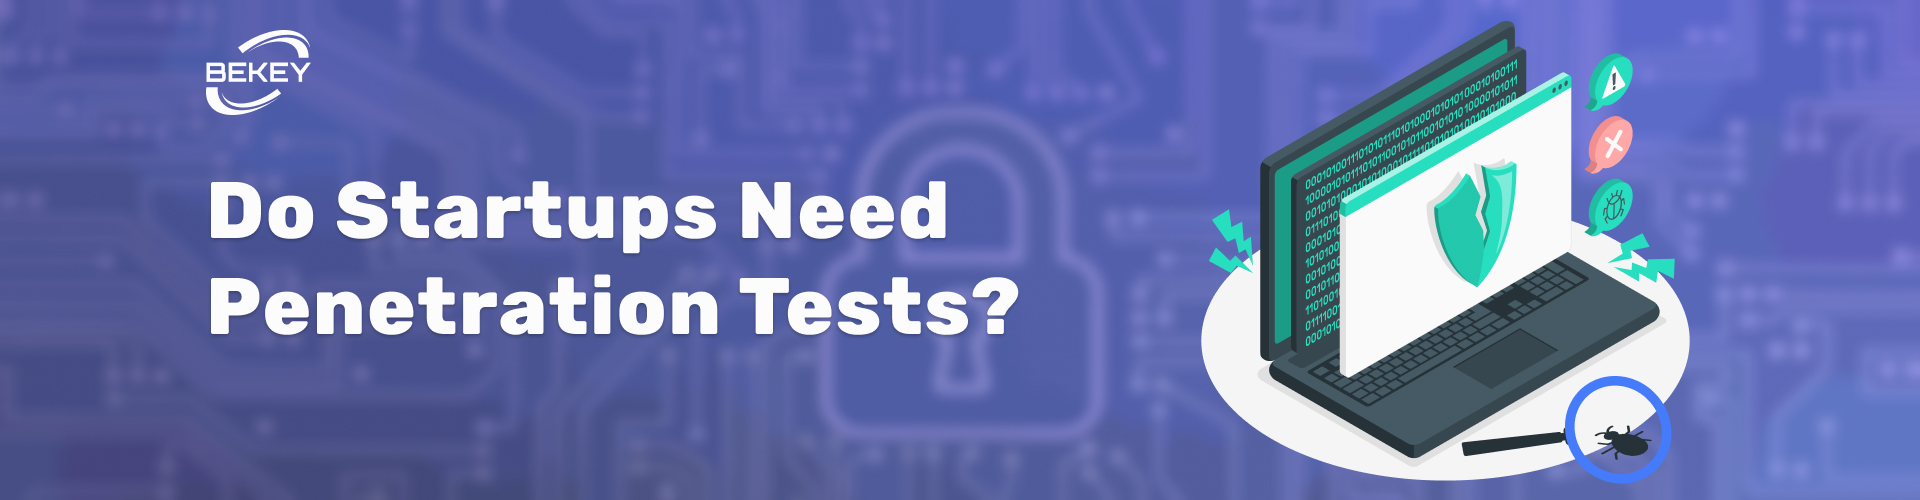 Do Startups Need Penetration Tests? Uncovering the Truth - image